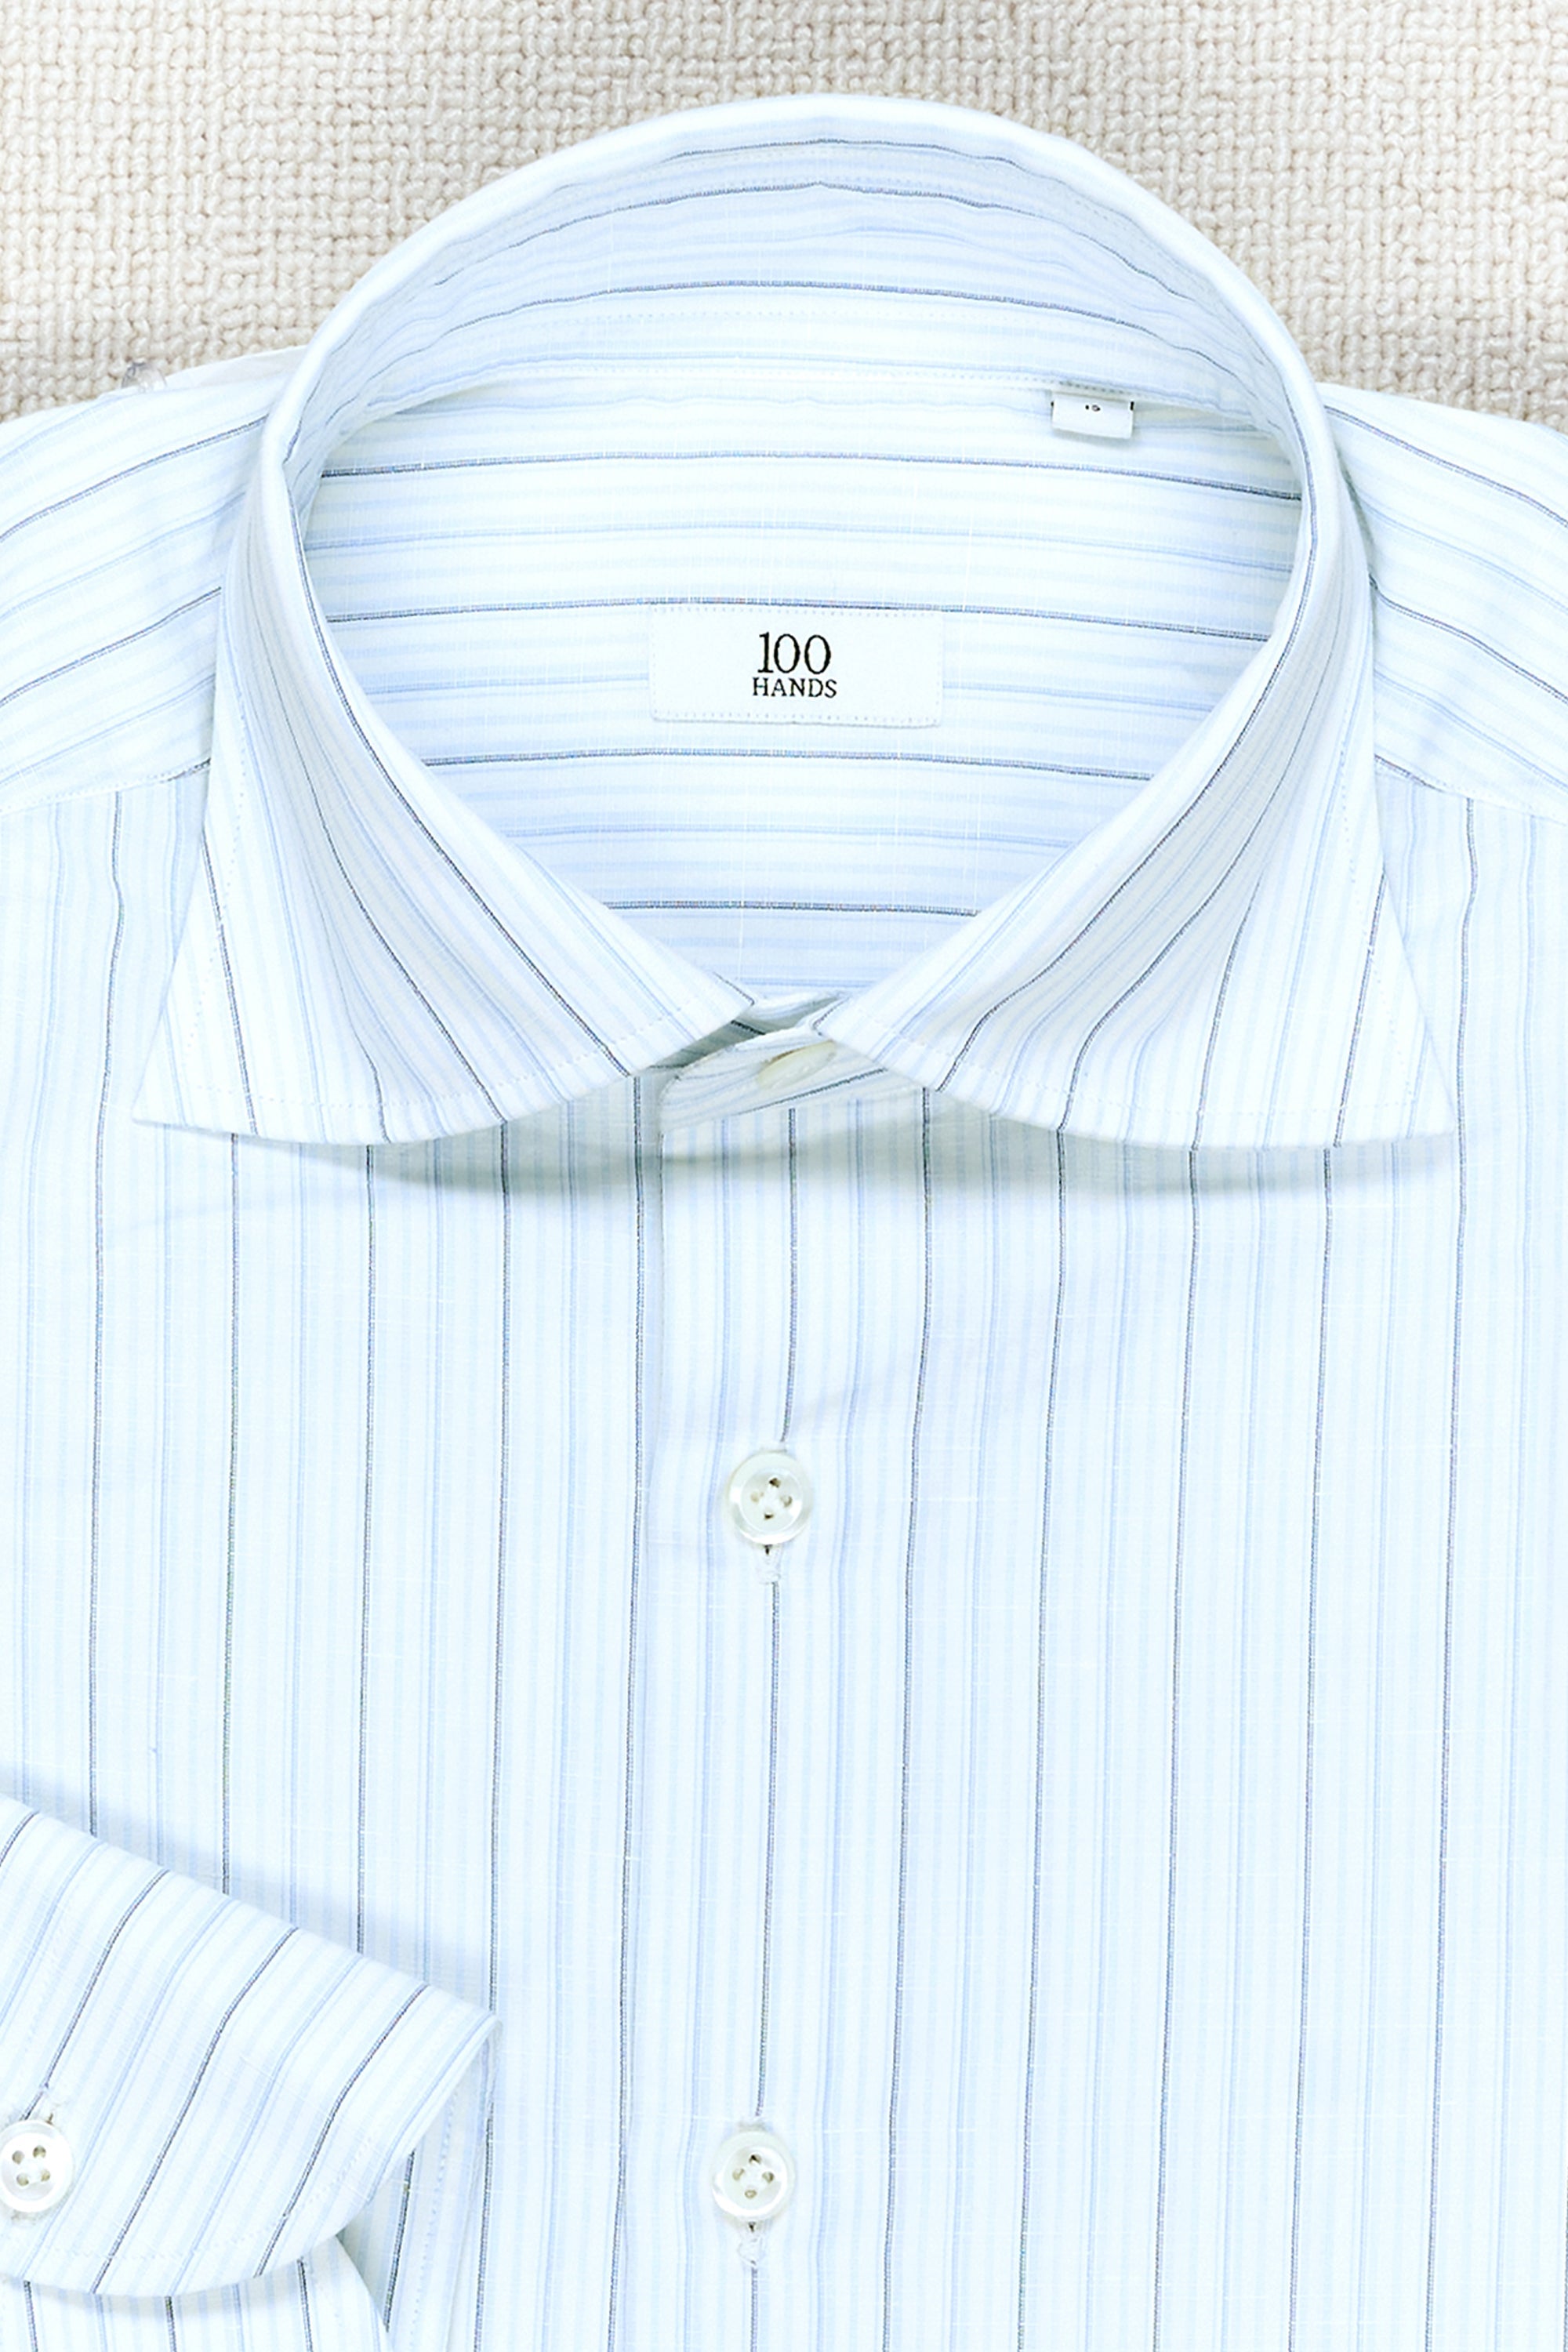 The Armoury by 100 Hands Blue Stripe Linen/Cotton Spread Collar Shirt *sample*